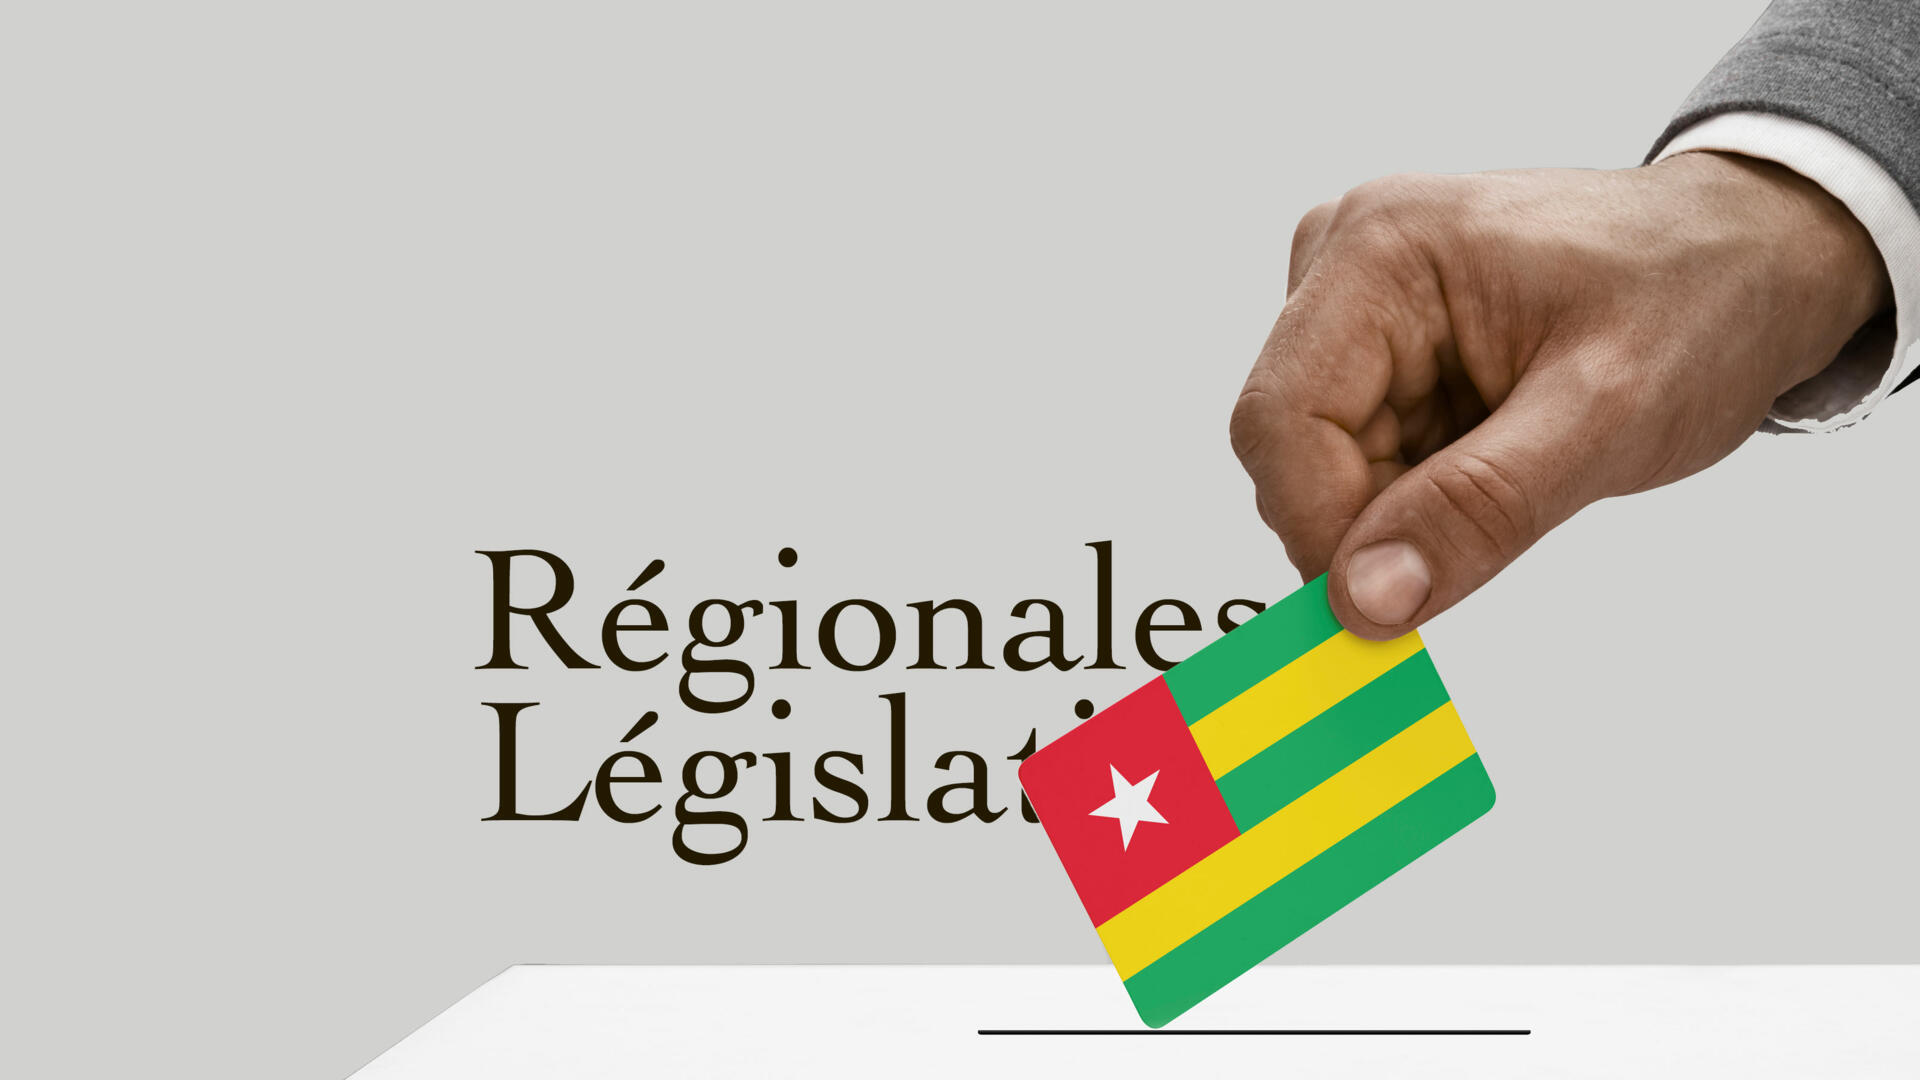 21st women elected regional councilors out of a total of 179 – TOGOTOPNEWS- Reliable and constructive information in just one click